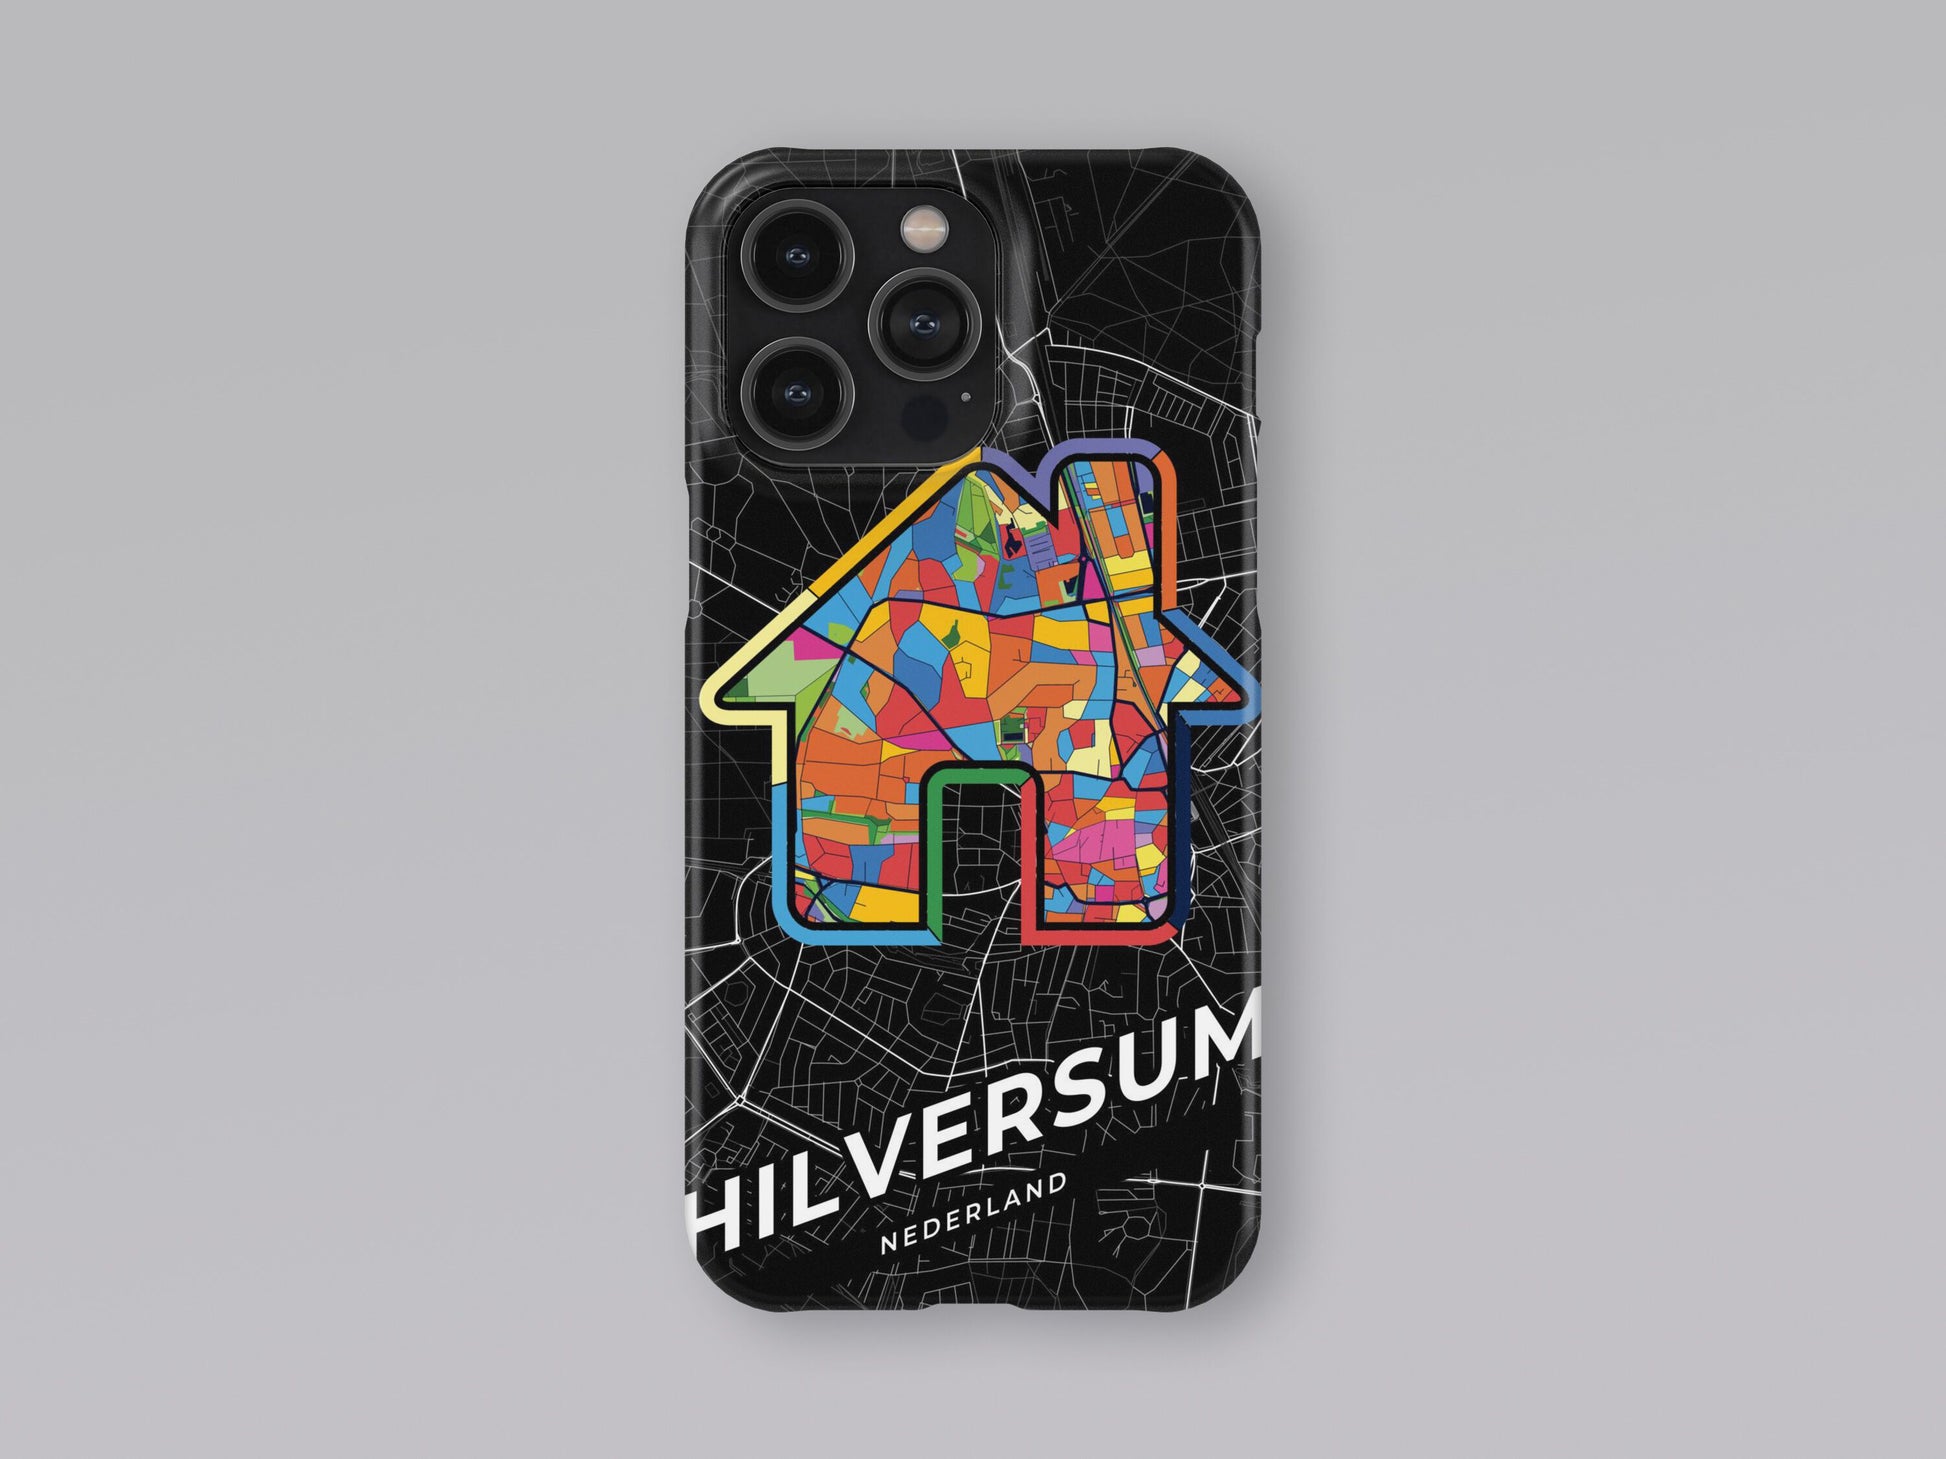 Hilversum Netherlands slim phone case with colorful icon. Birthday, wedding or housewarming gift. Couple match cases. 3